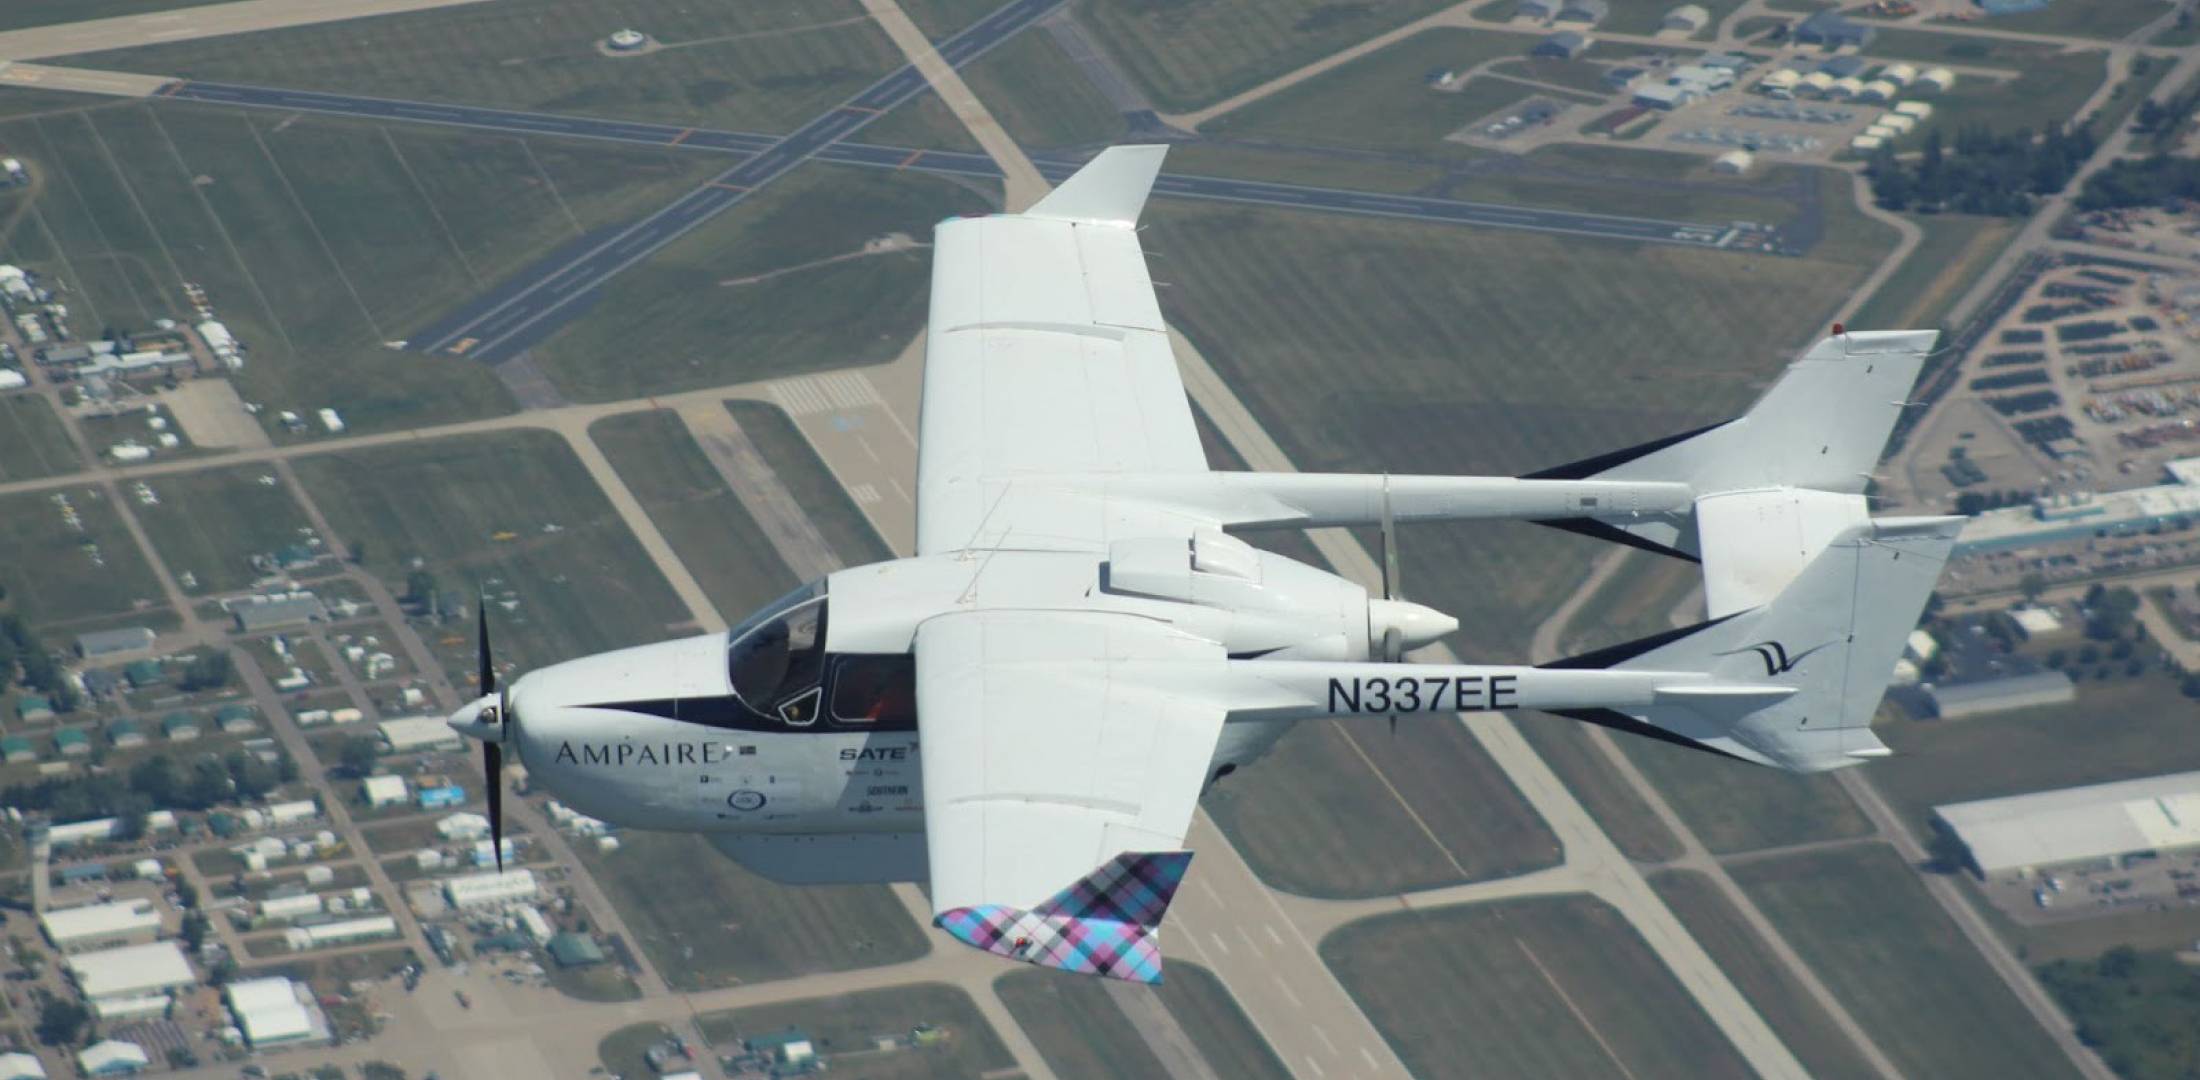 Ampaire EEL hybrid-electric airplane